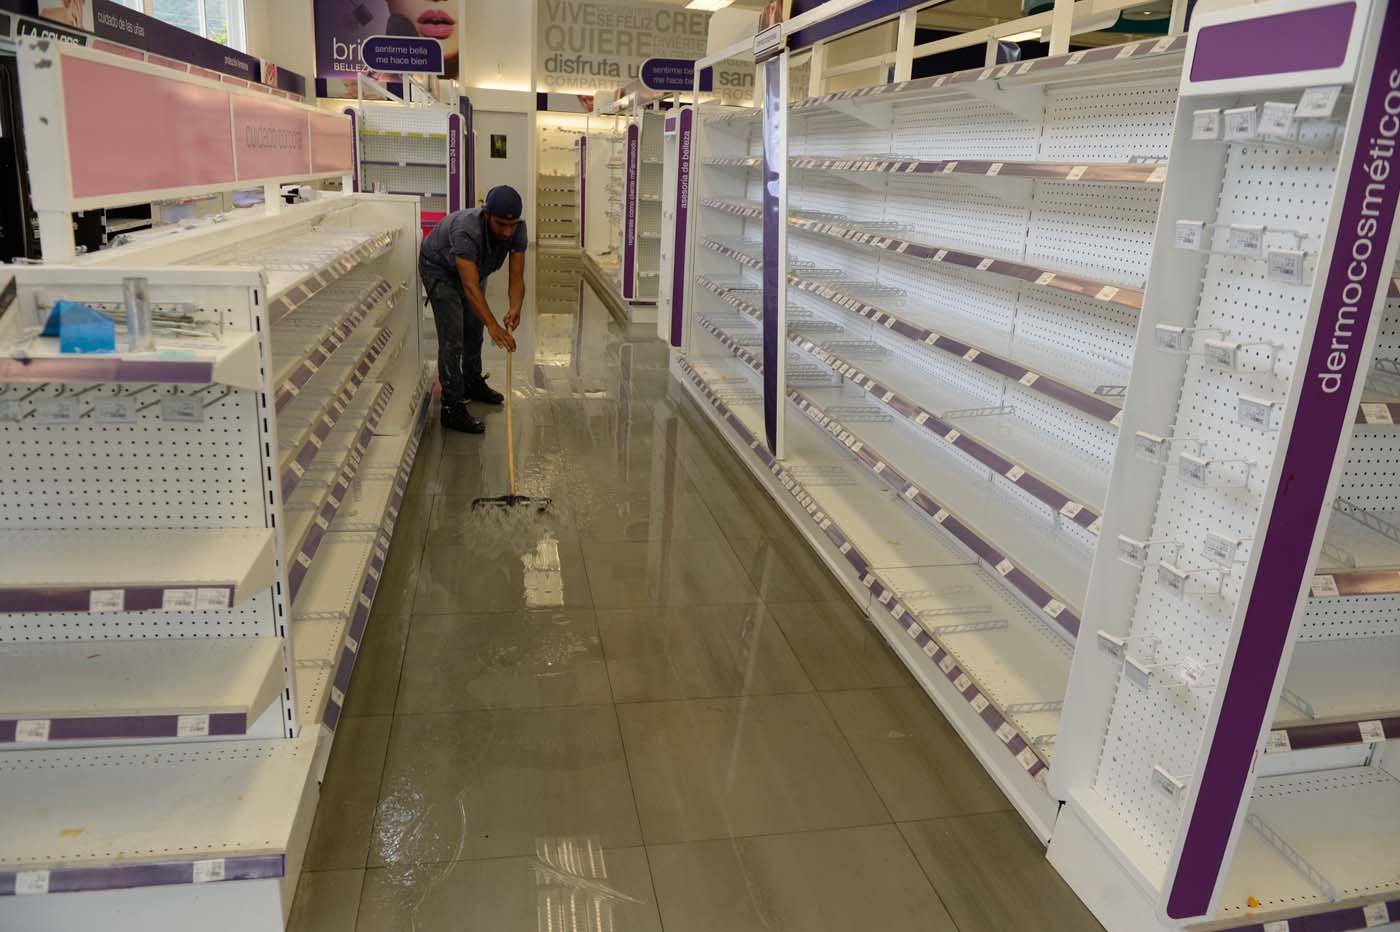 Employees clean the aisles in a looted pharmacy in Maracay, Aragua state, Venezuela on June 27, 2017. / AFP PHOTO / FEDERICO PARRA